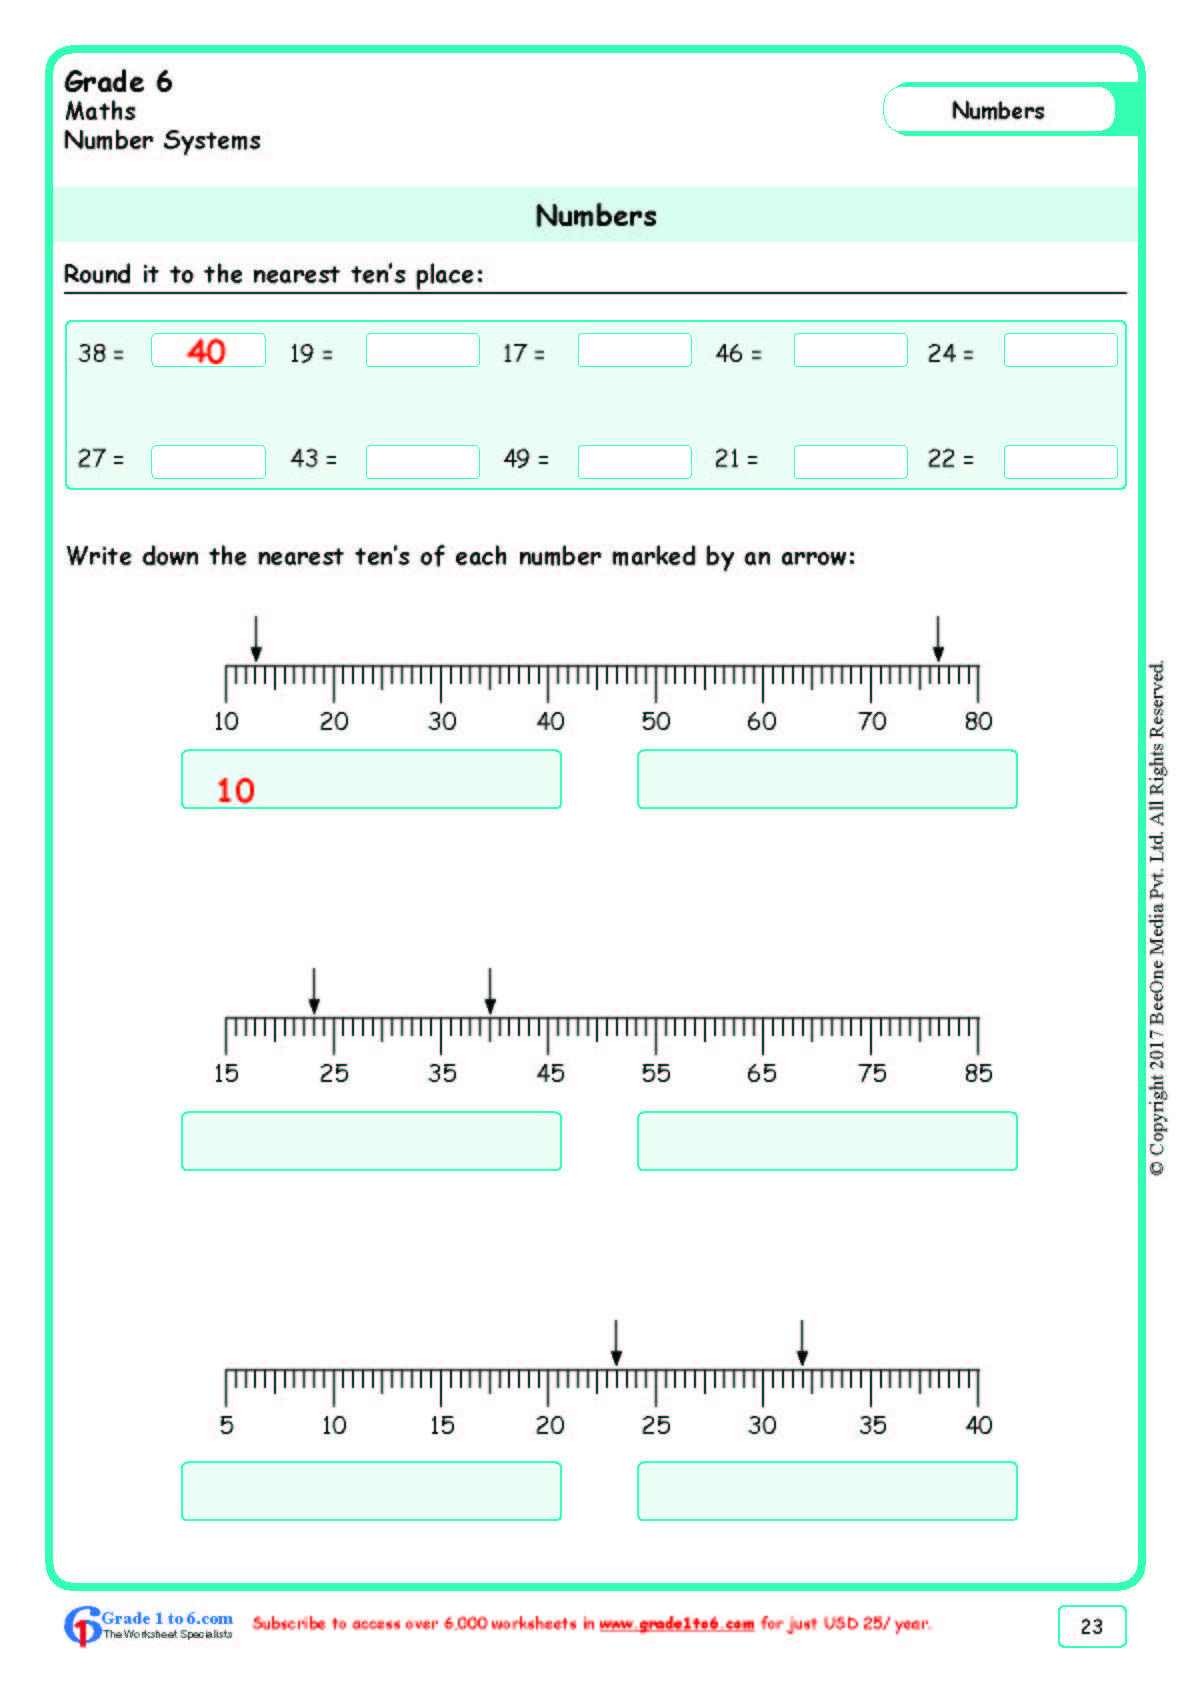 Rounding Numbers Worksheets|www.grade1to6.com